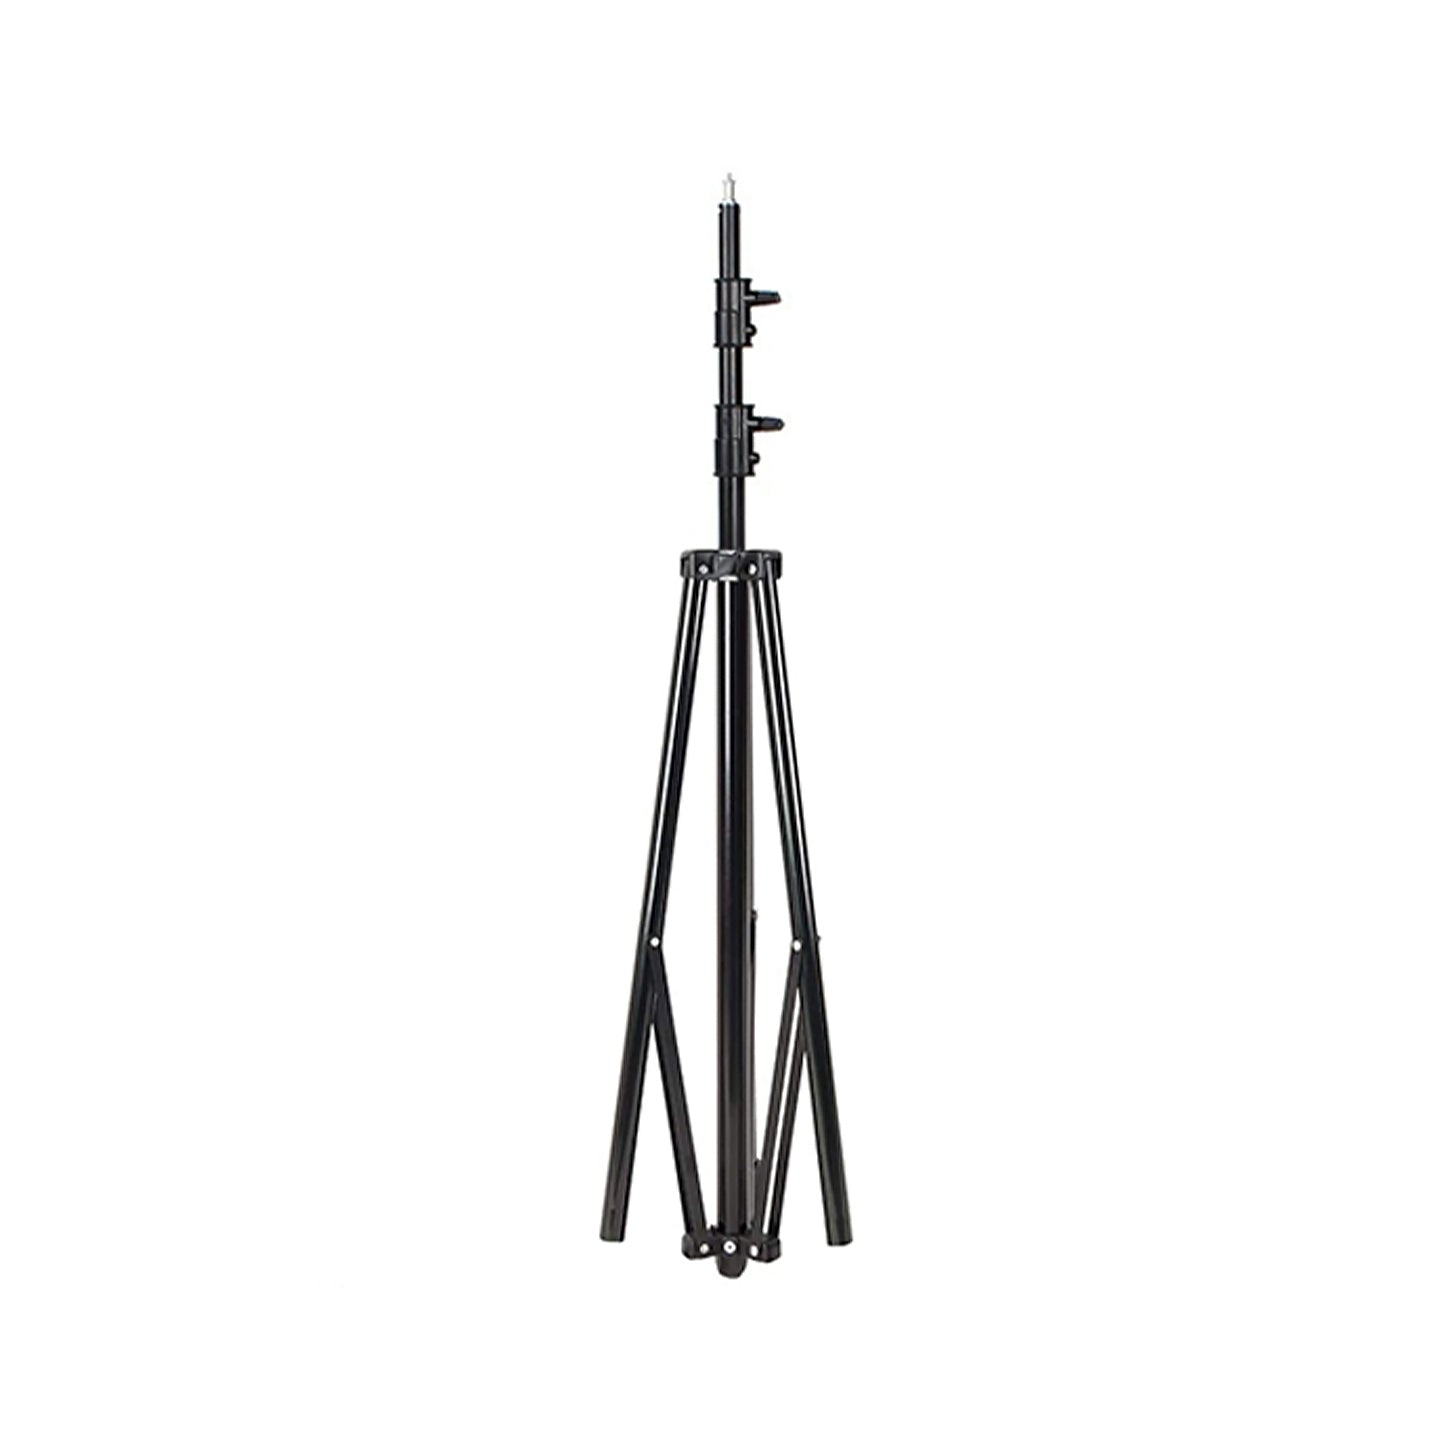 Pxel 280cm Heavy Duty Spring / Air Cushioned Studio Light Stand for Flash, Video Light, Softbox, and Reflector | LS280A LS280